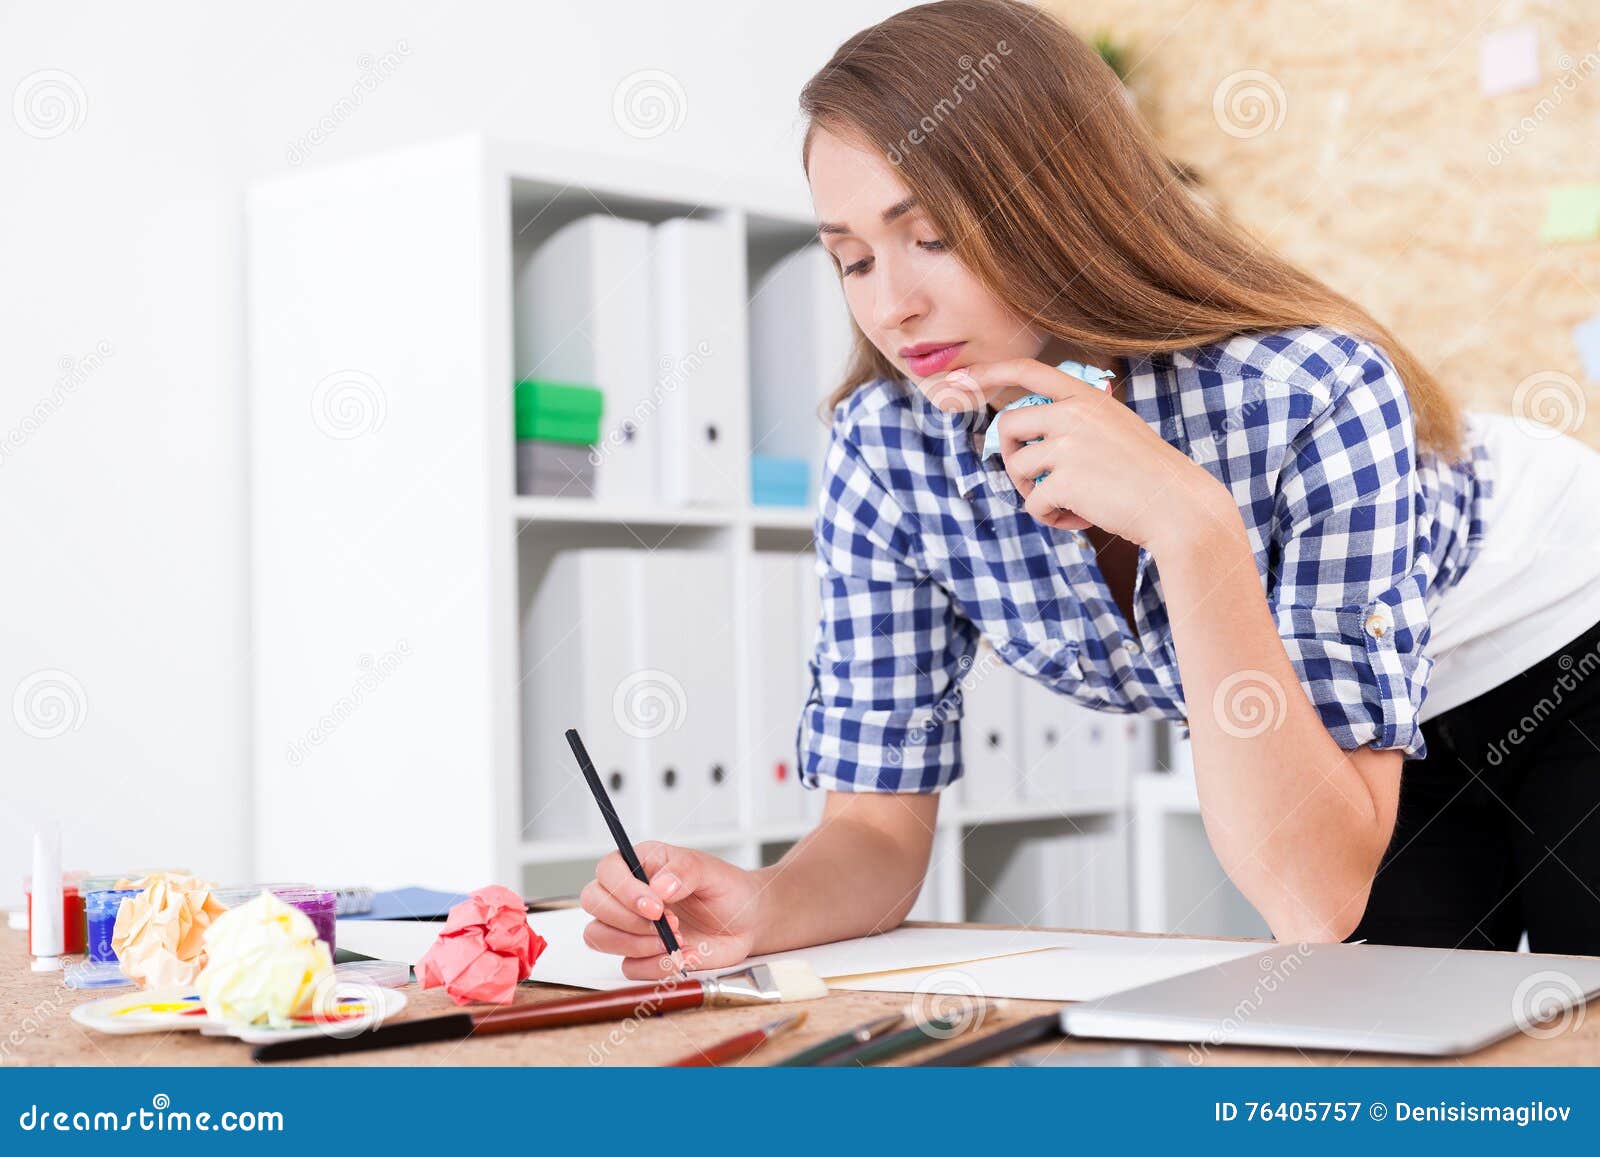 Painting is my hobby stock image. Image of color, education - 76405757